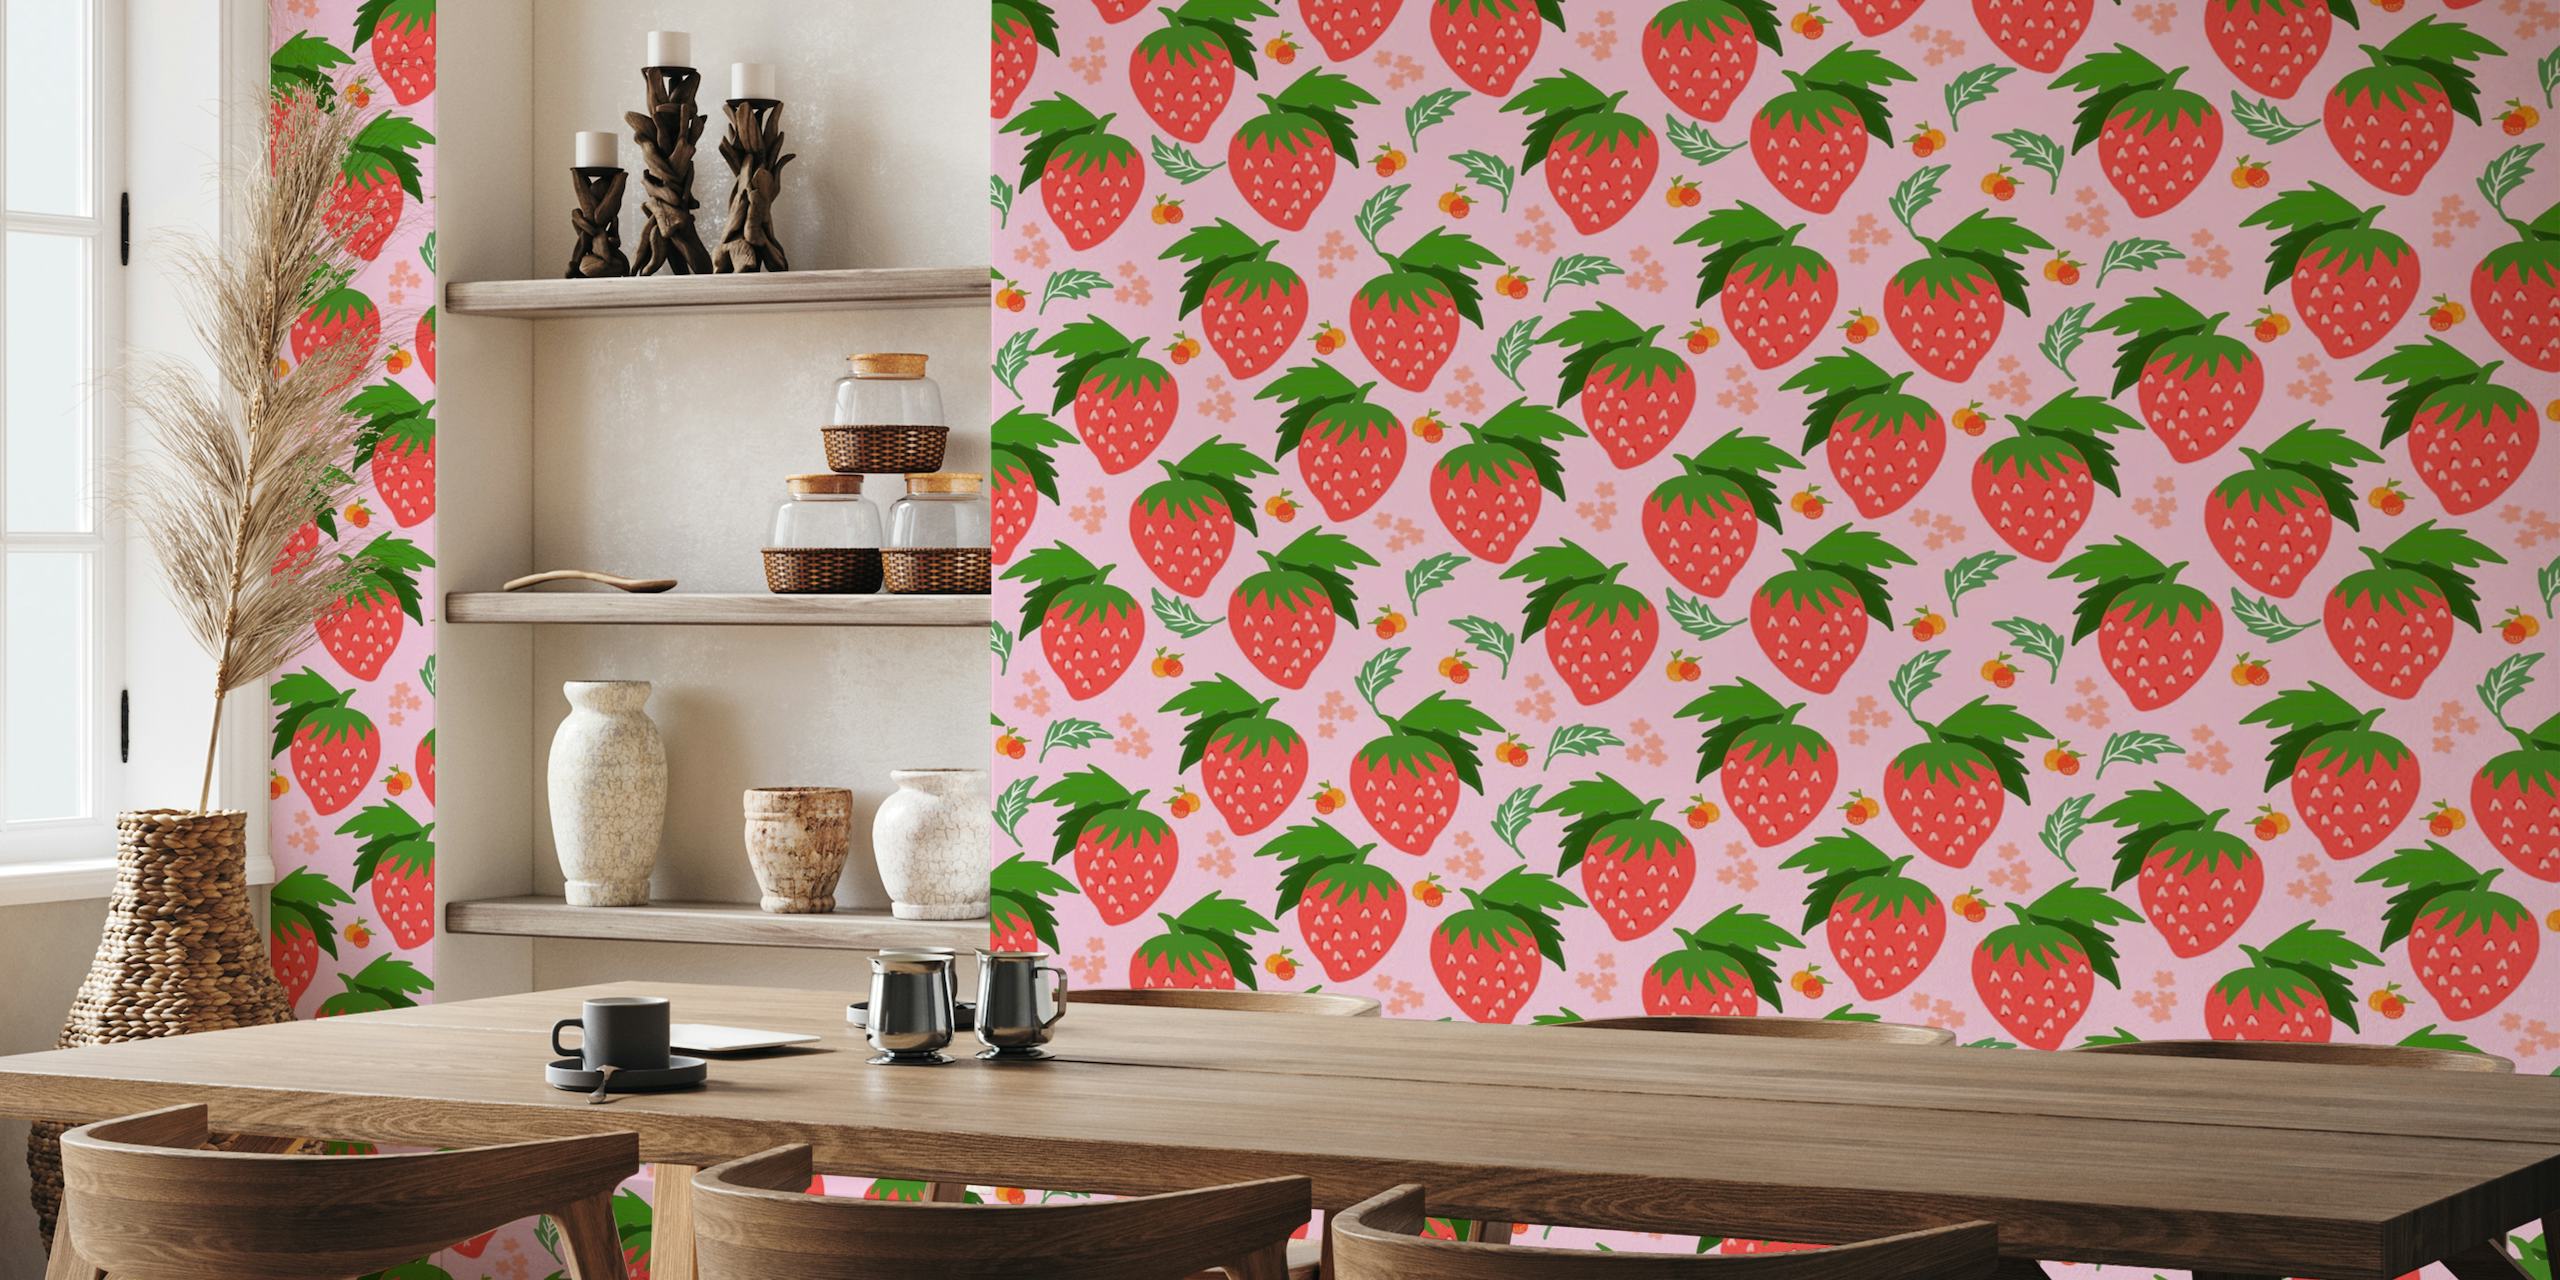 Strawberries and Pink fruit with leaves and elements kawaii style cute pattern wallpaper